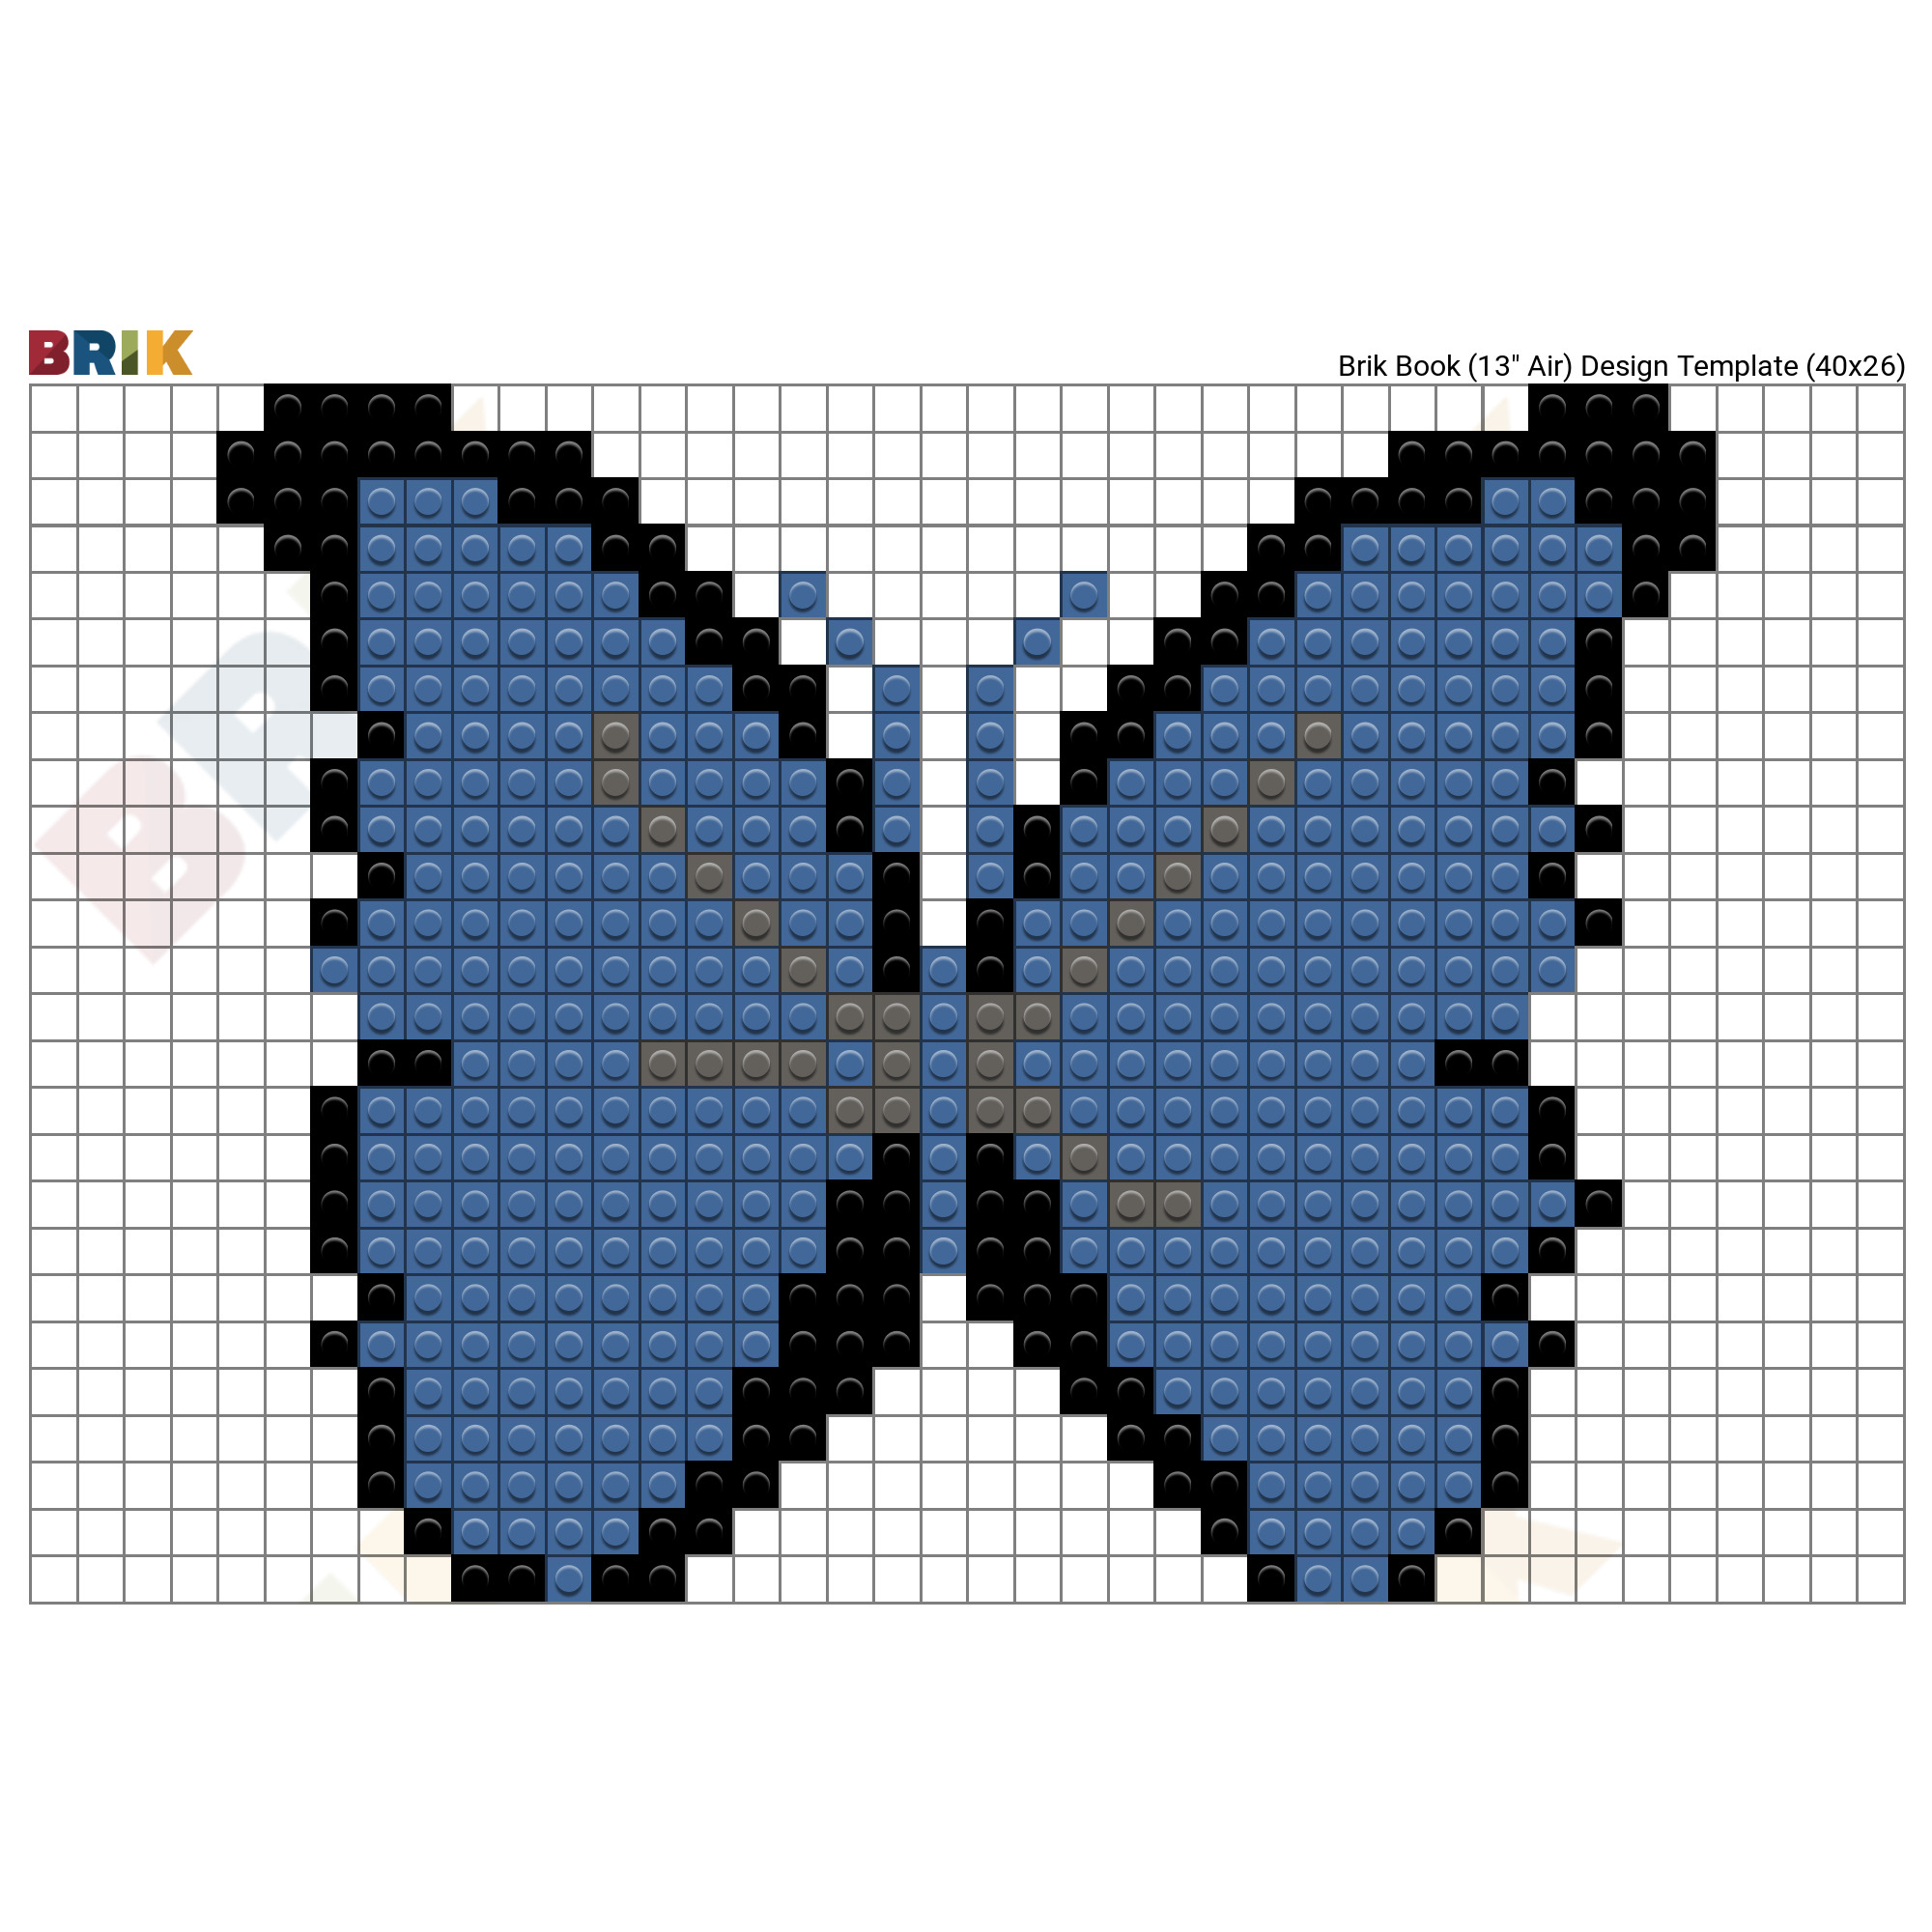 How to Make a Pixel Art Butterfly - Mega Voxels